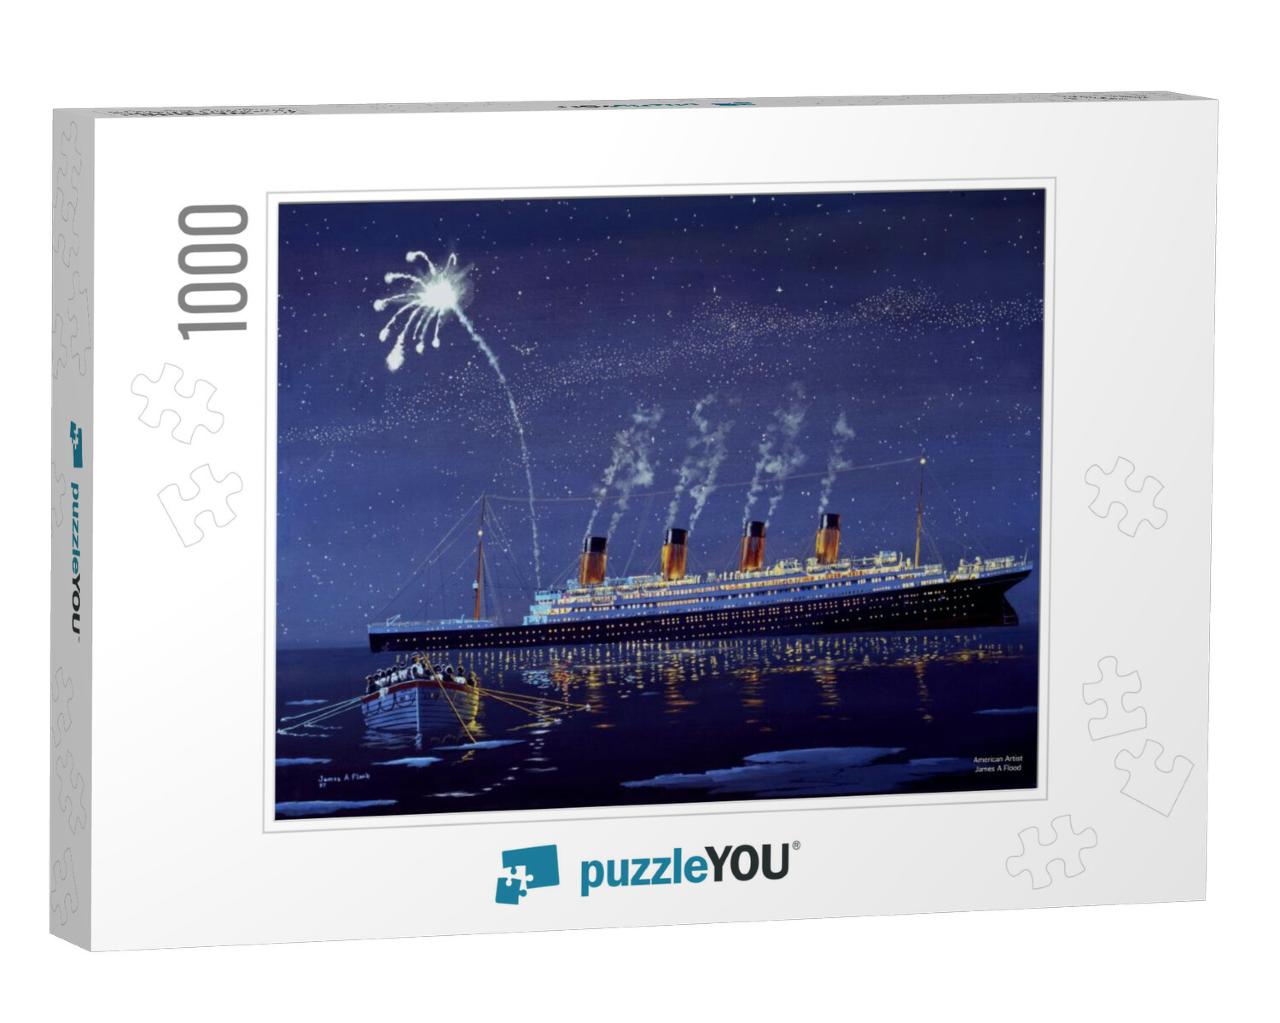 Titanic Sinking Jigsaw Puzzle with 1000 pieces